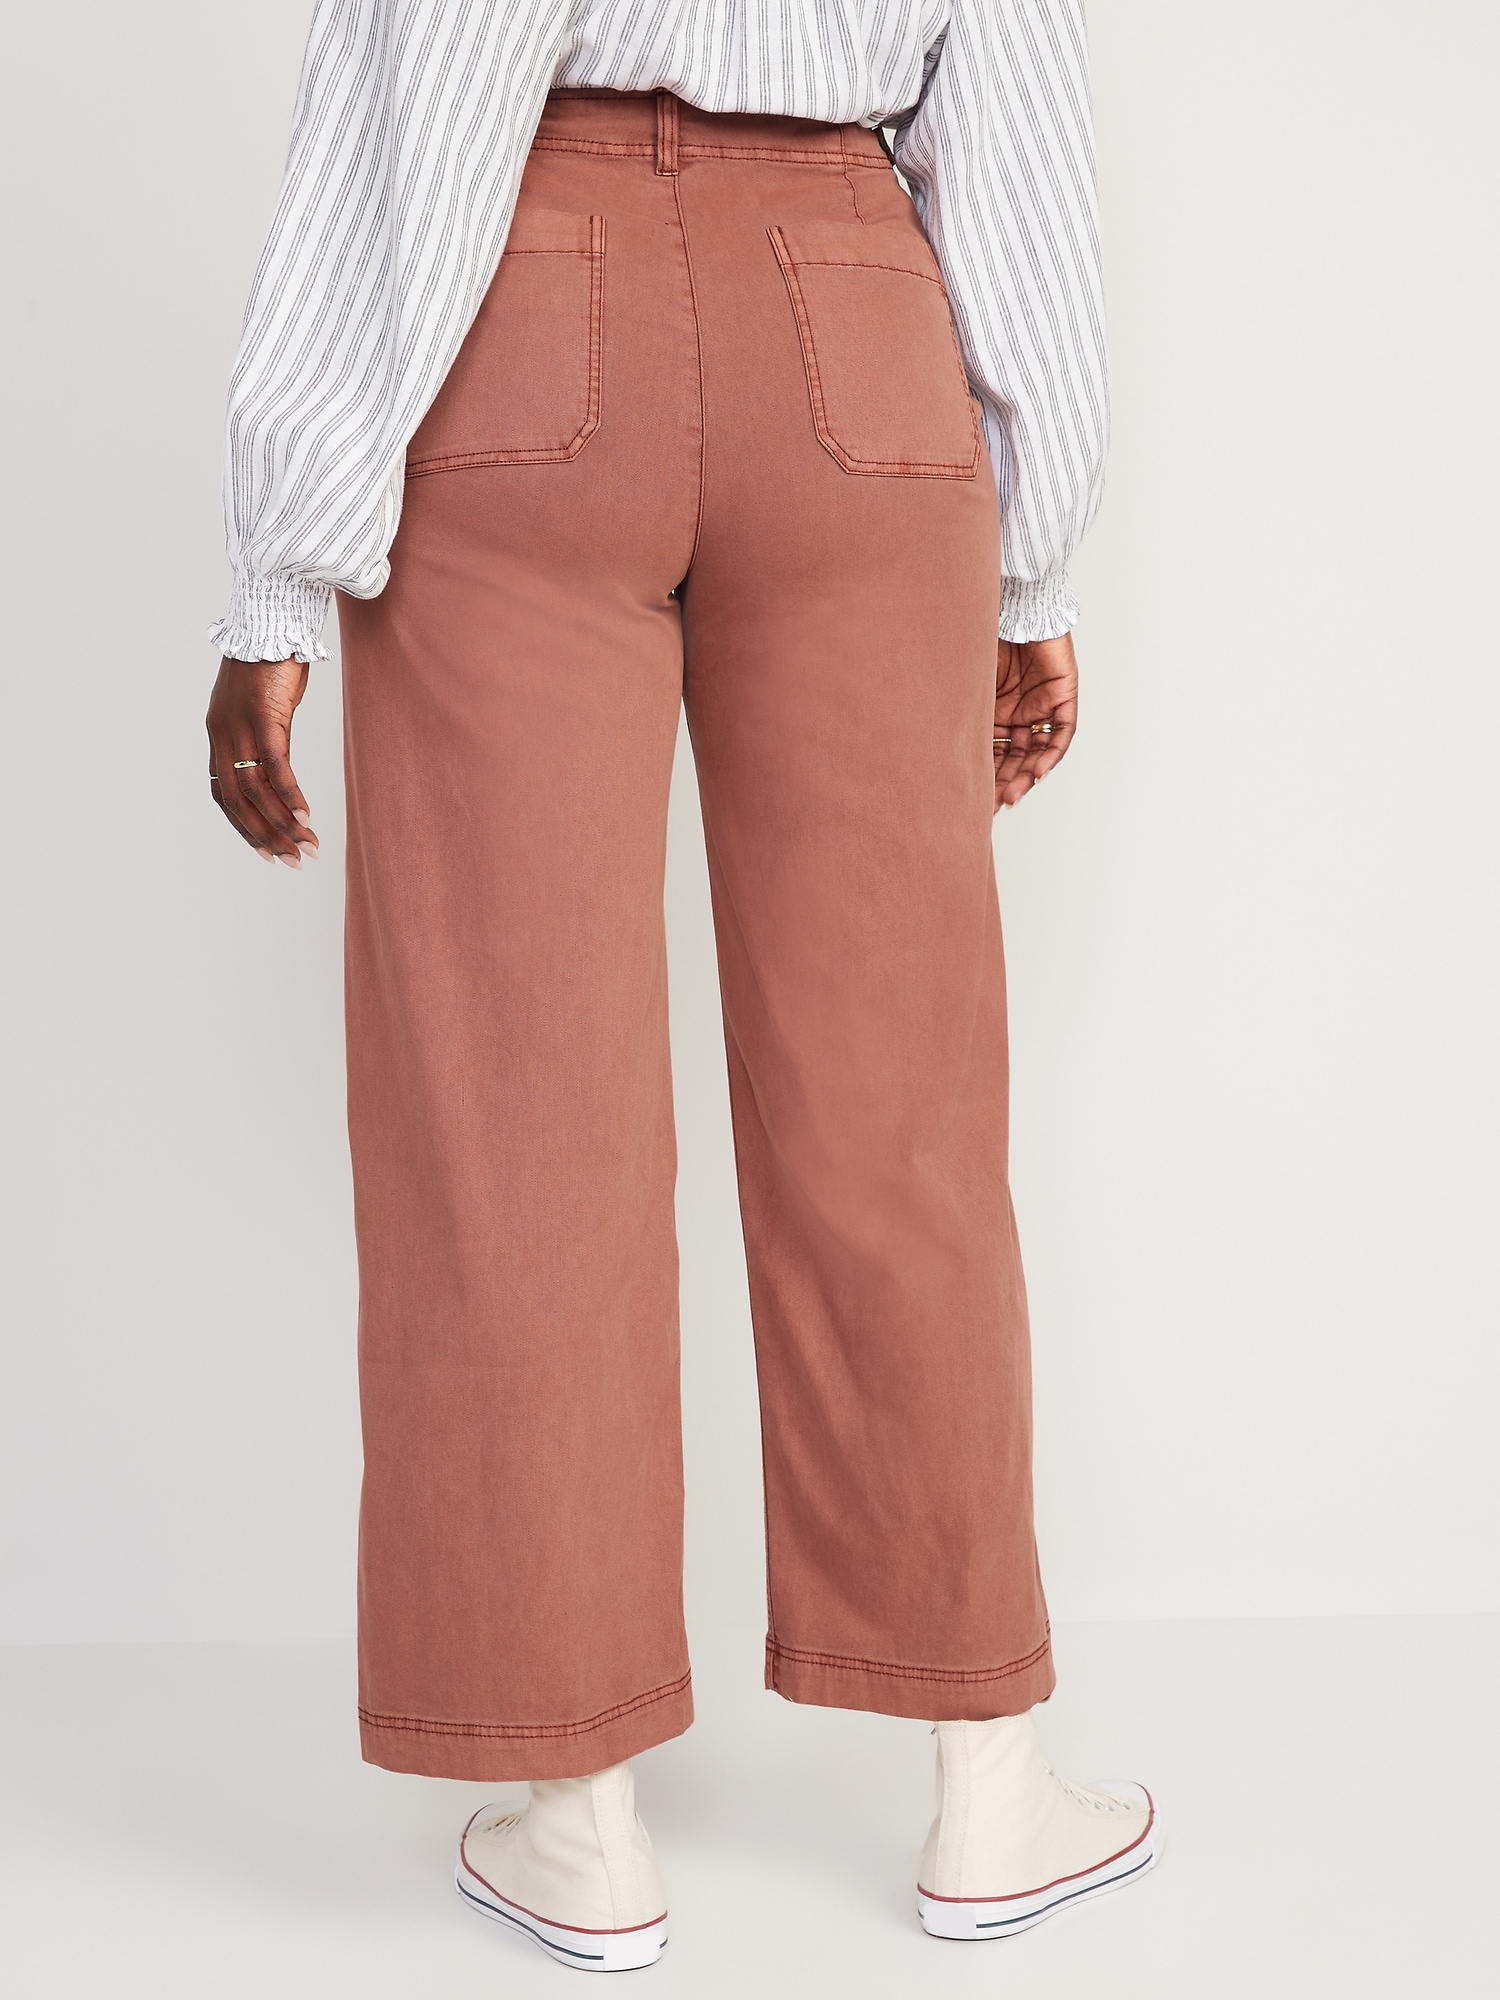 Extra High Waisted Wide Leg Workwear Pants For Women Old Navy